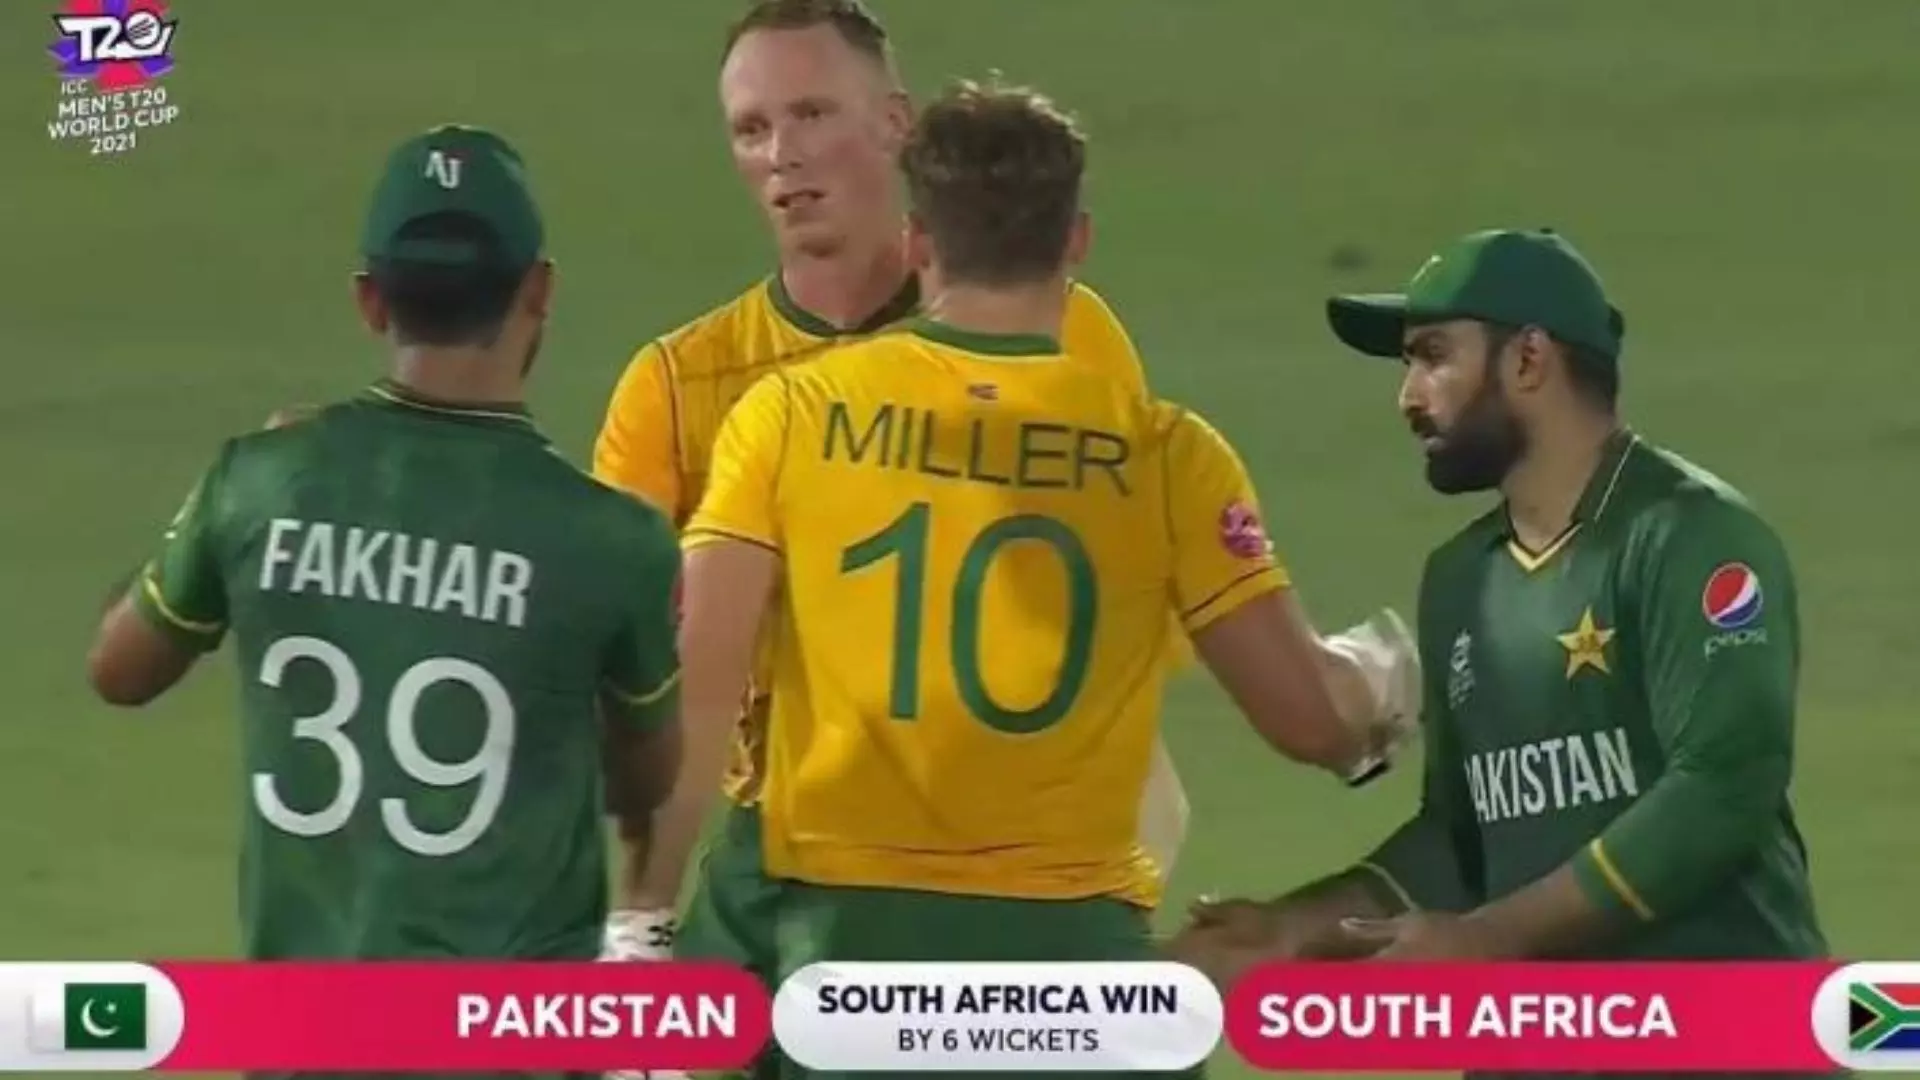 South Africa won the Match Against Pakistan in T20 World Cup Warm-up Match